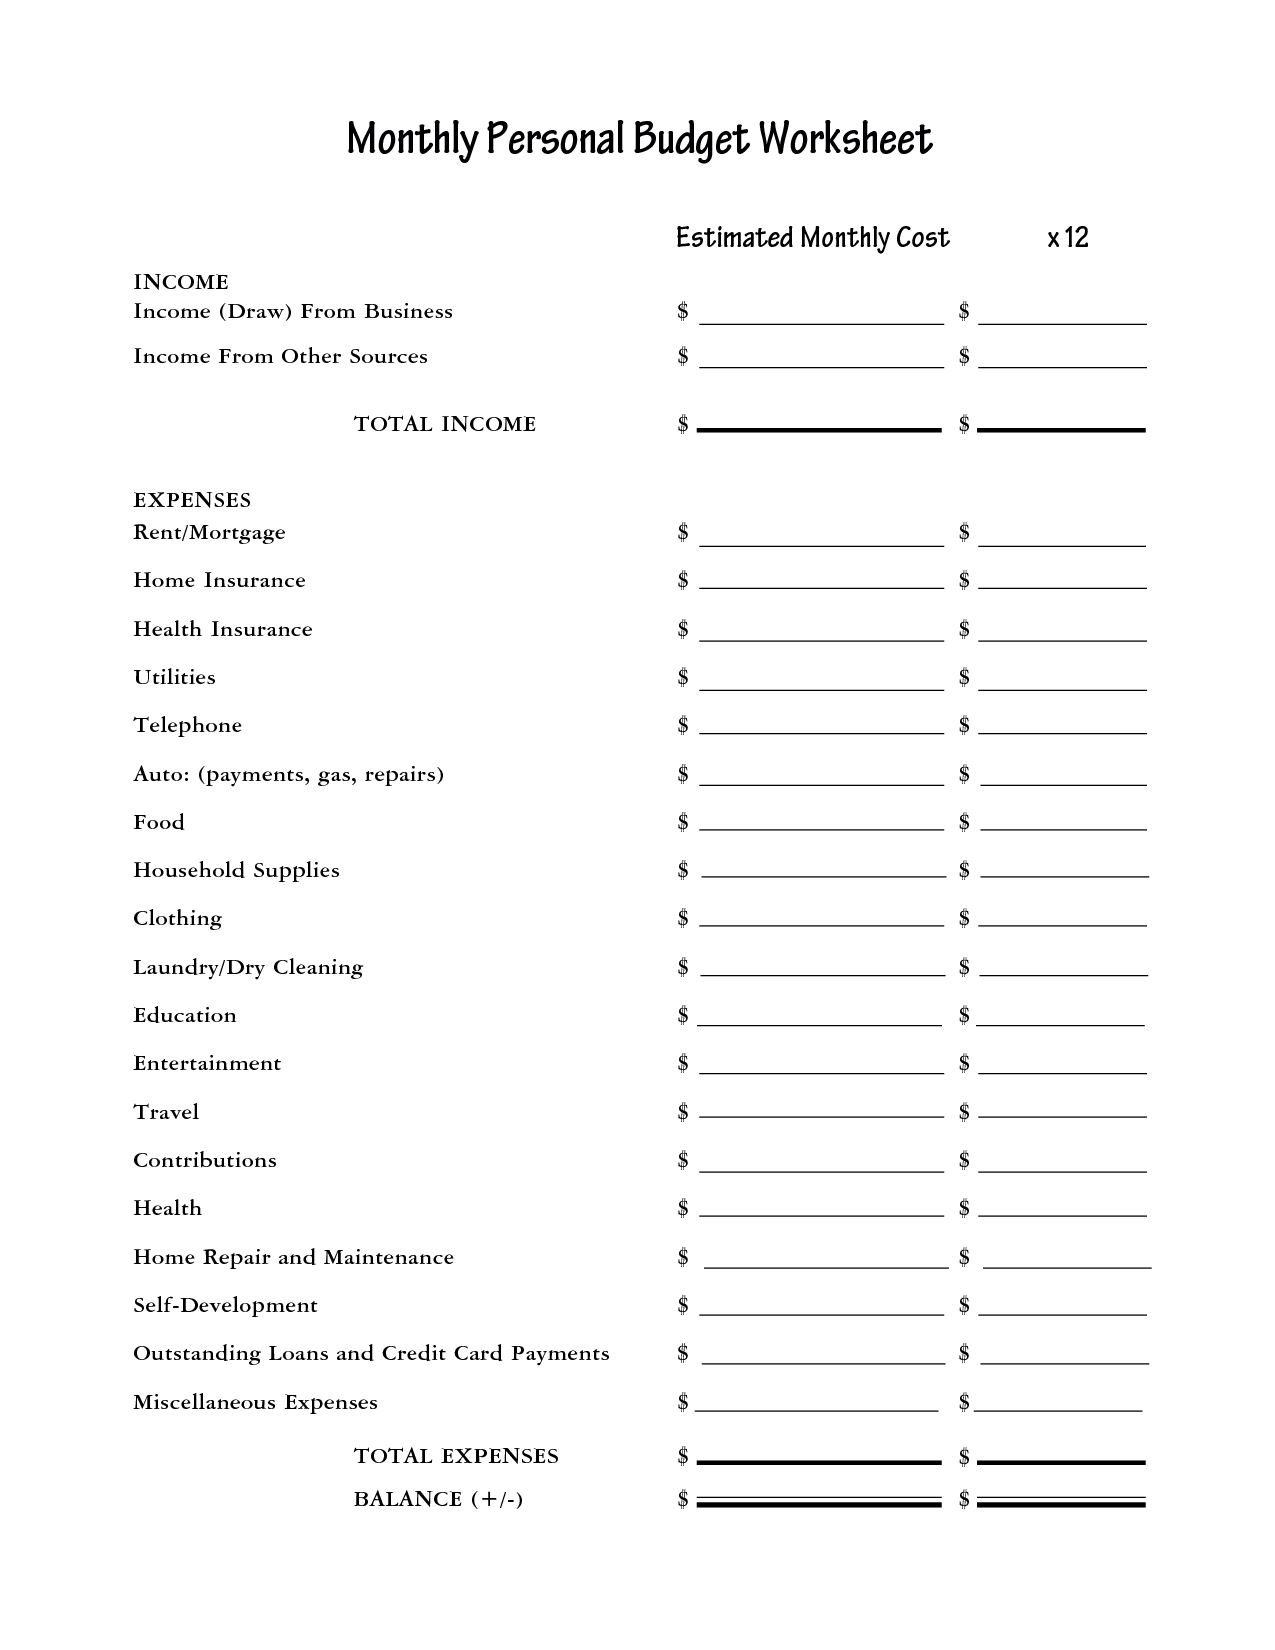 Blank Personal Monthly Budget Worksheet Image